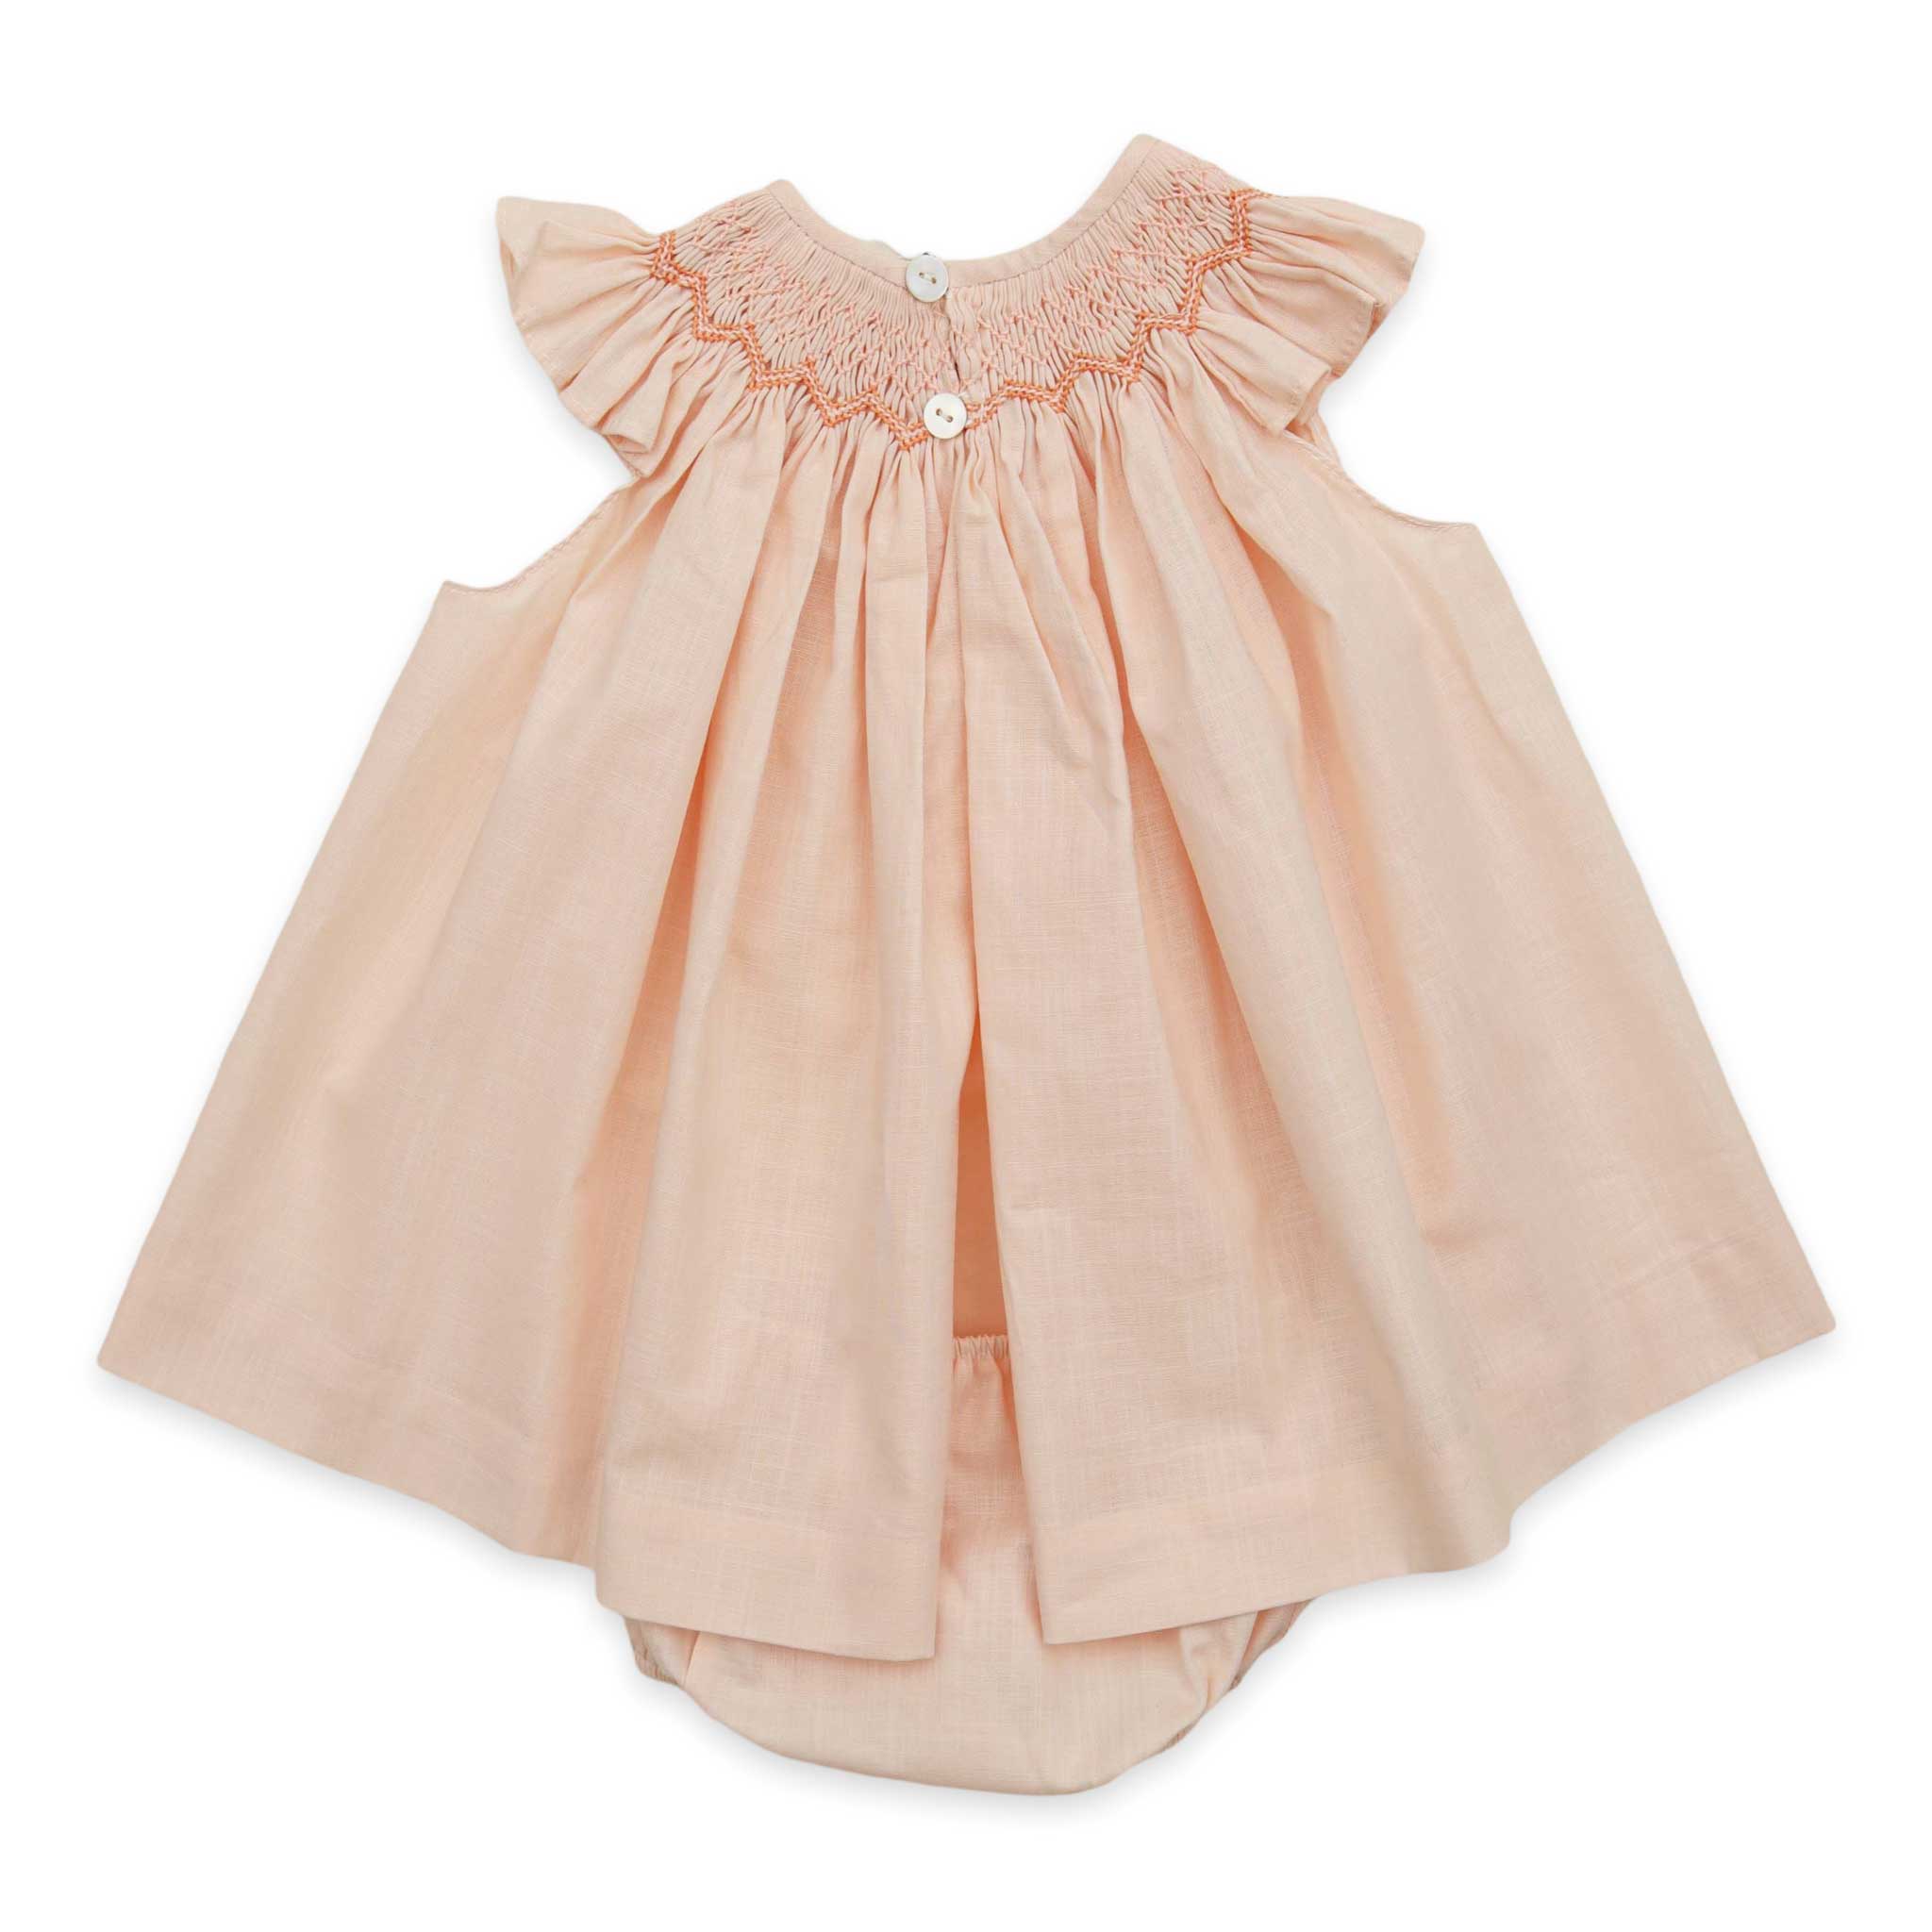 spanish hand smocked baby girl outfit in peach